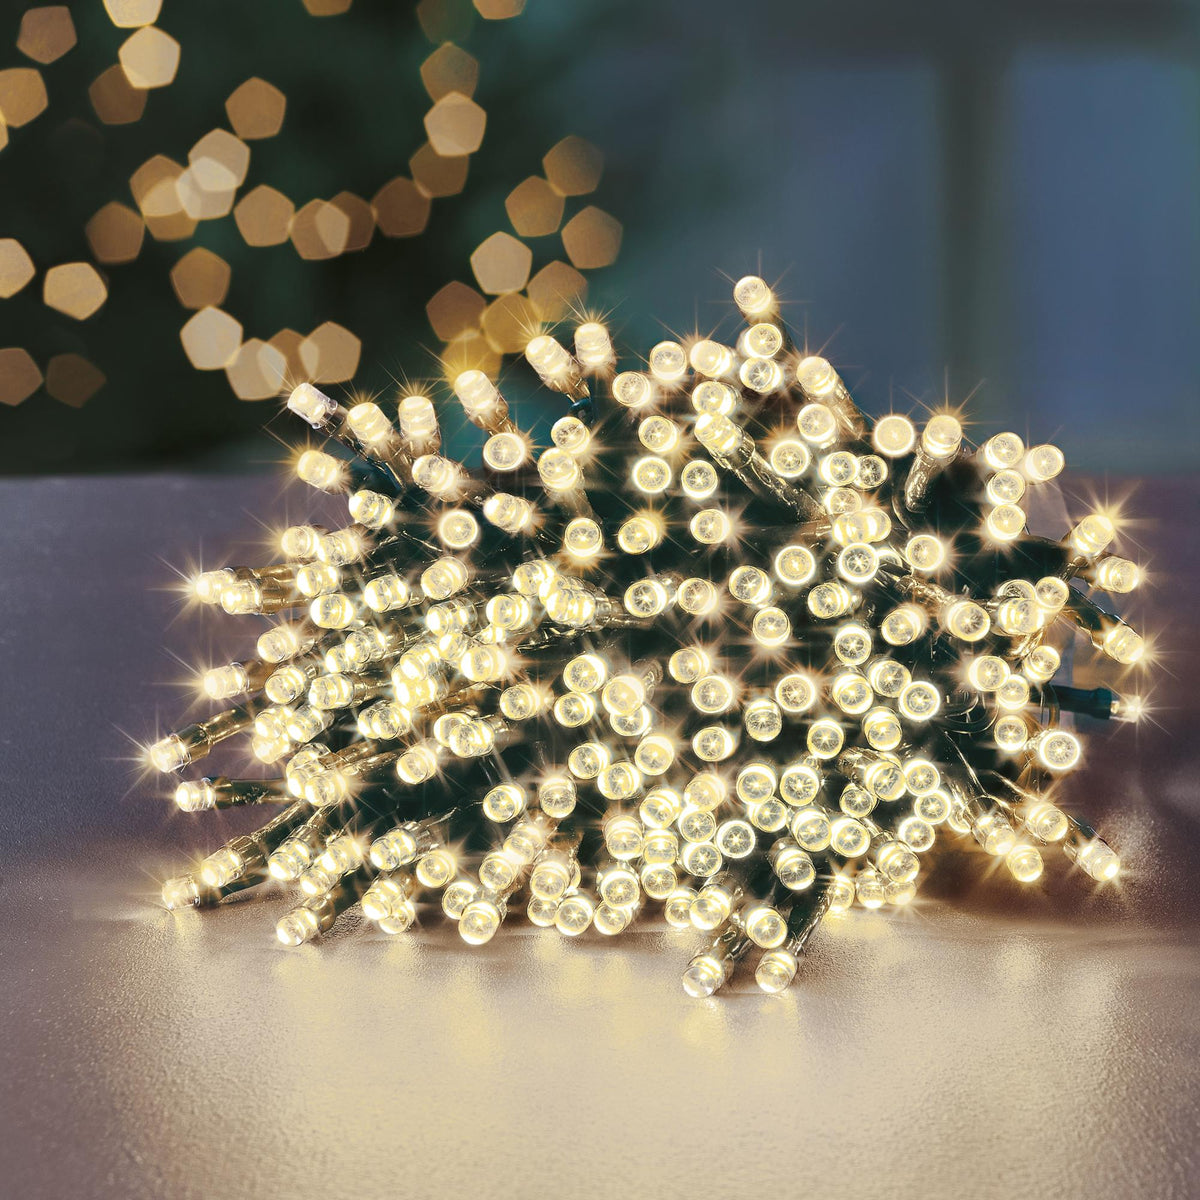 200 Warm White Supabrights Multi Action LED String Lights with Timer